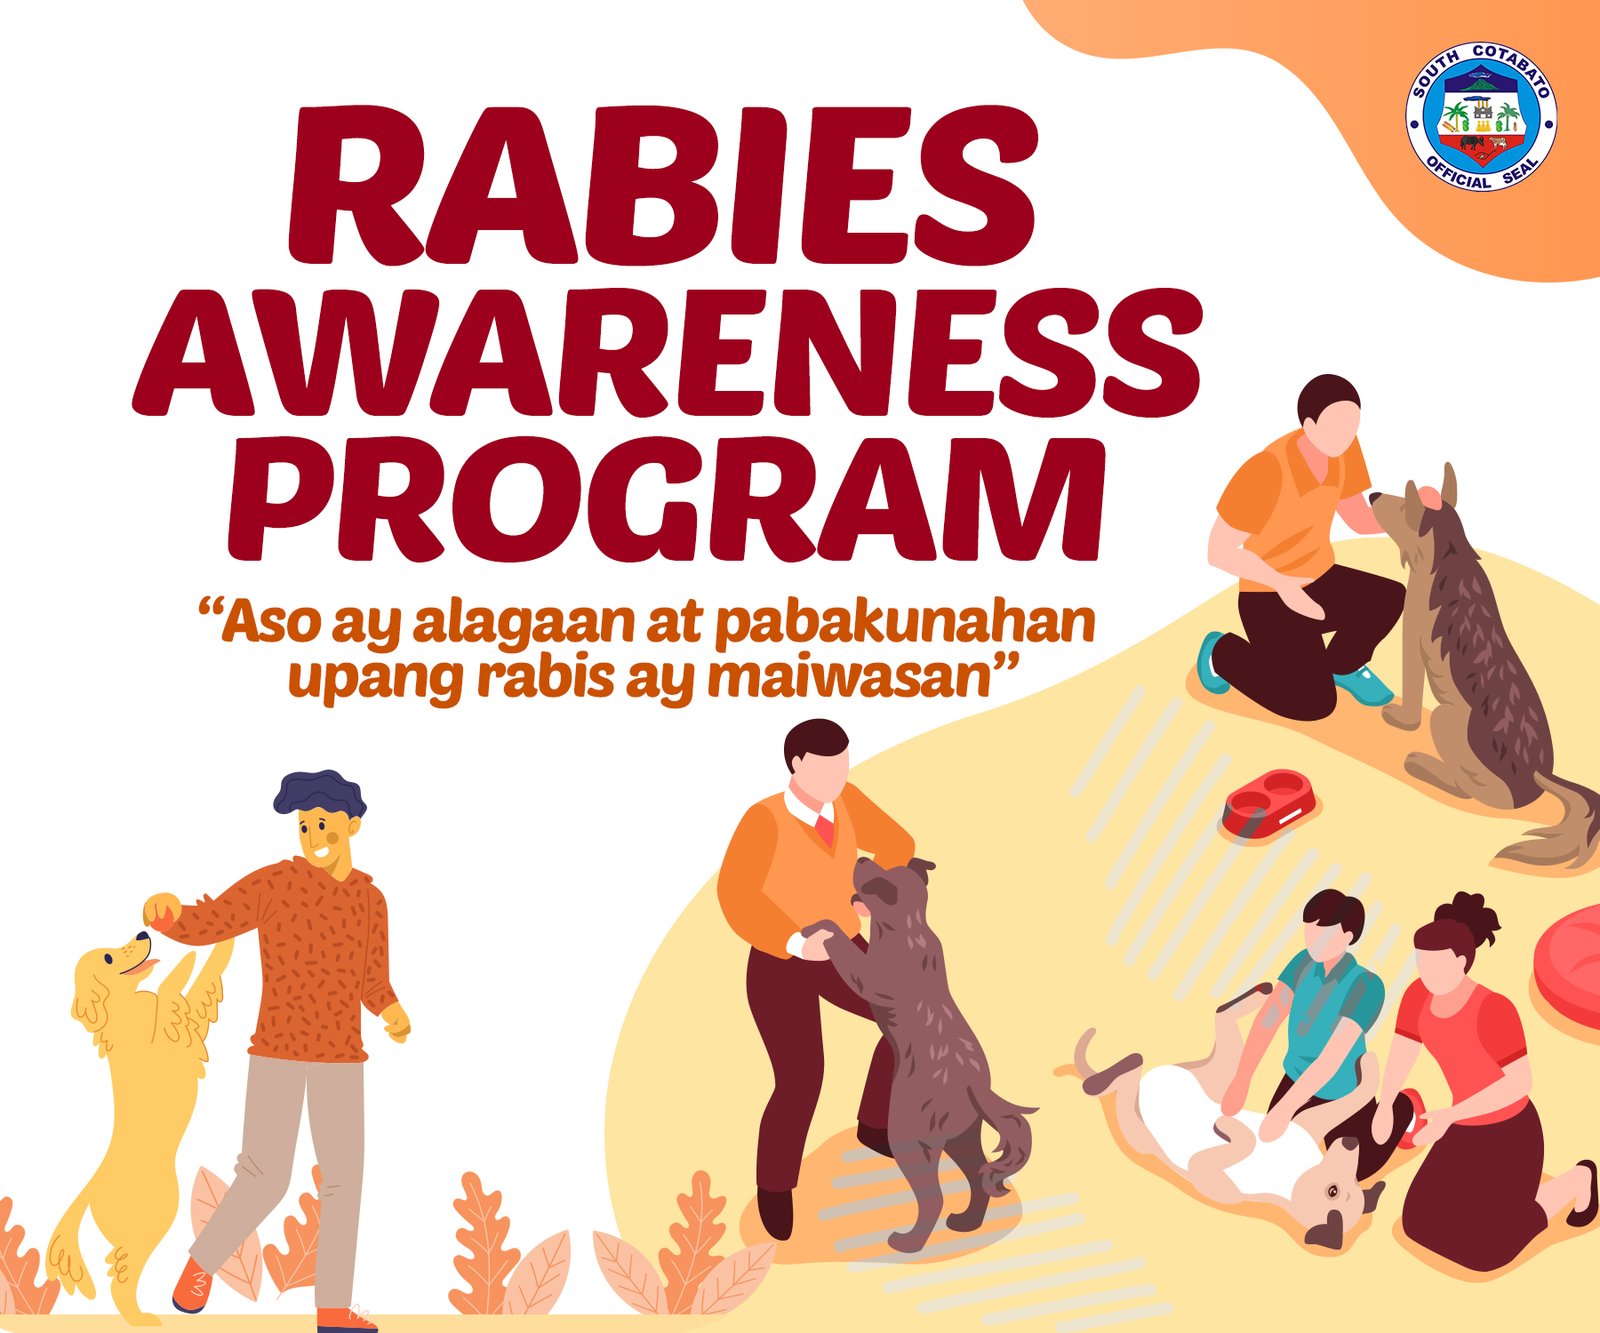 PVET urged the pet owners to submit dogs for antirabies vaccination